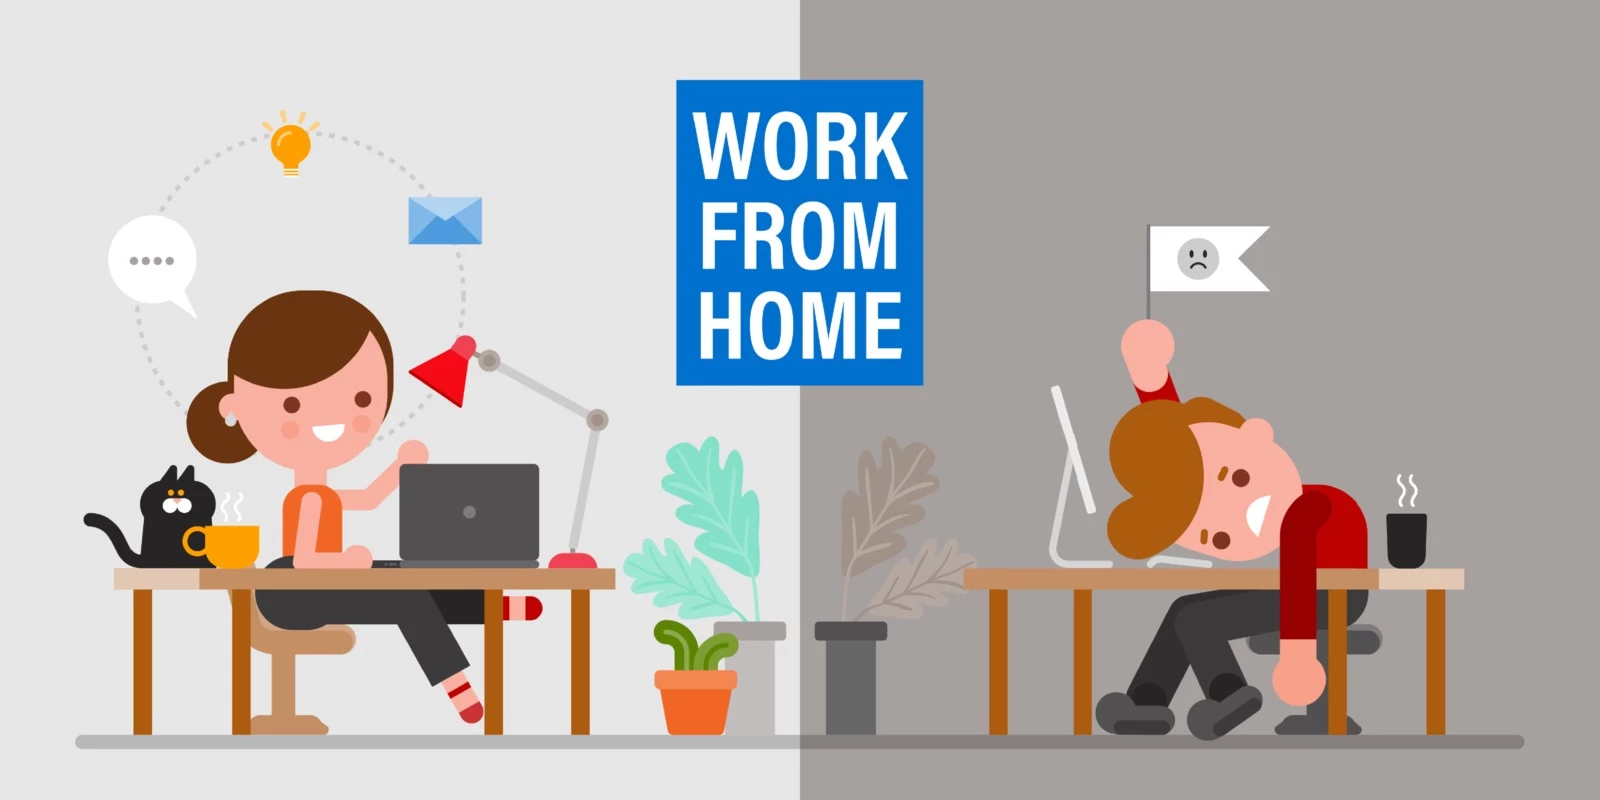 Split illustration comparing two remote workers: one smiling and organized, the other frustrated and disorganized.